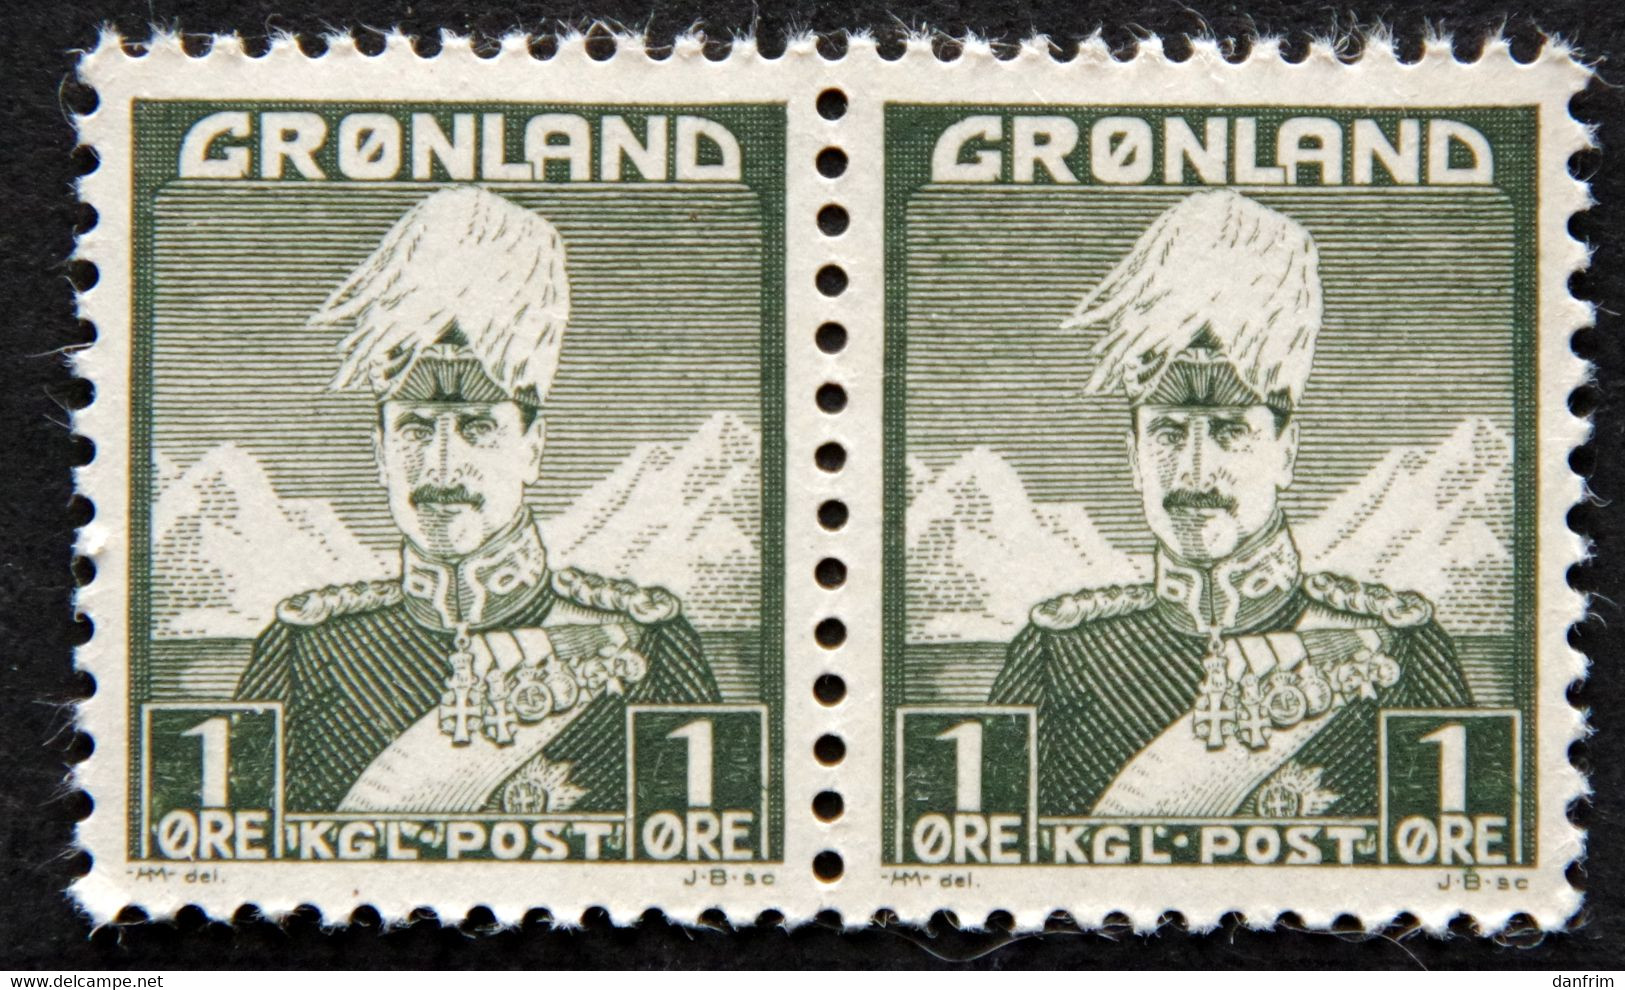 Greenland  1938  Christian X MiNr.1a  MNH  (**) ( Lot F 2281) - Unused Stamps